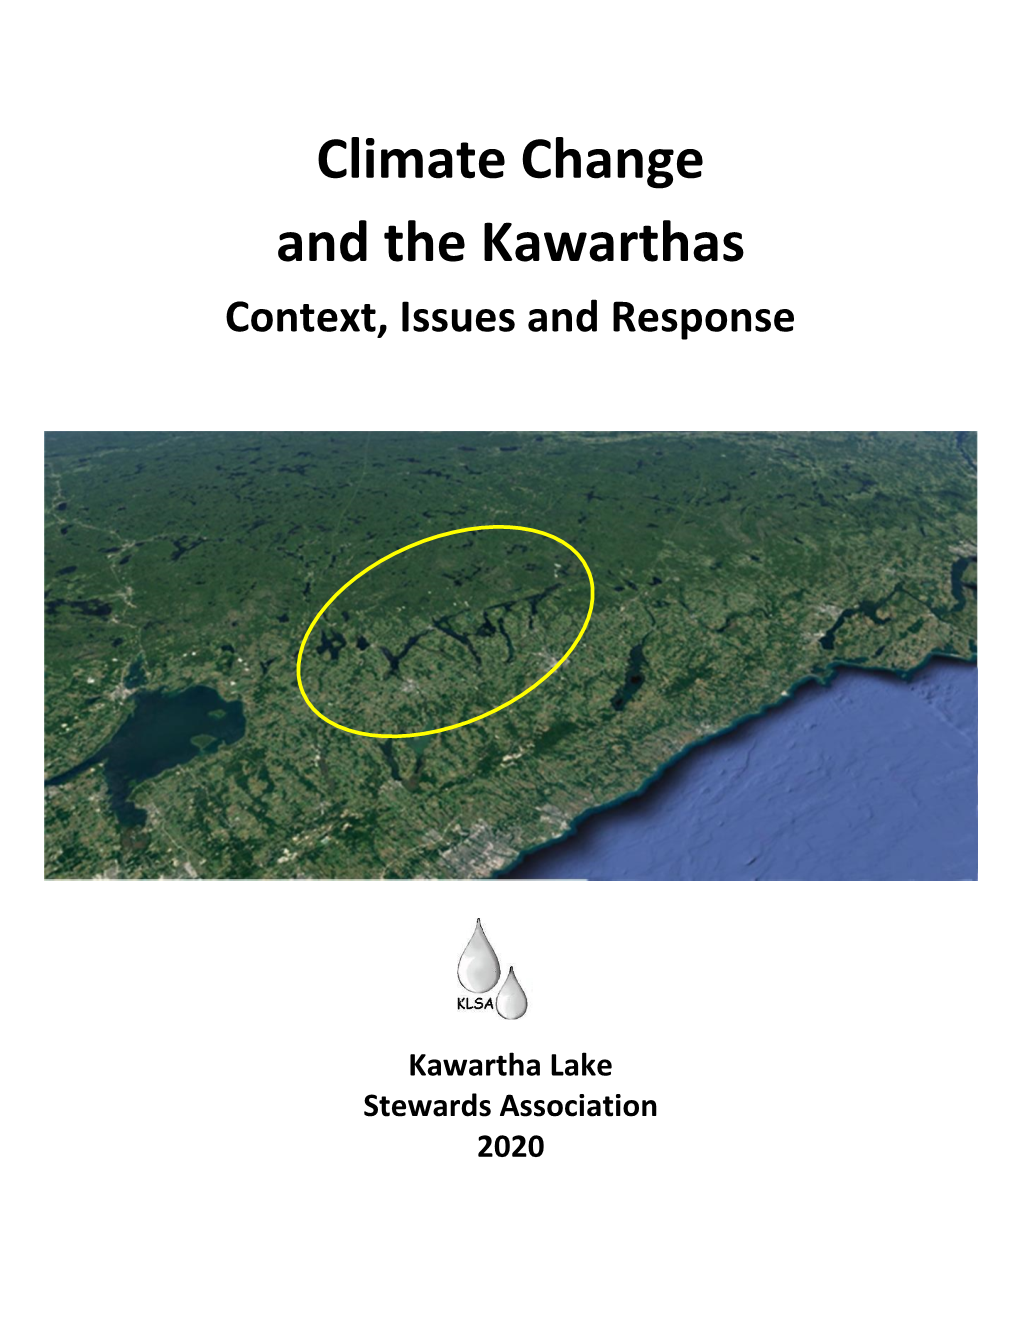 Climate Change and the Kawarthas, Context, Issues and Response